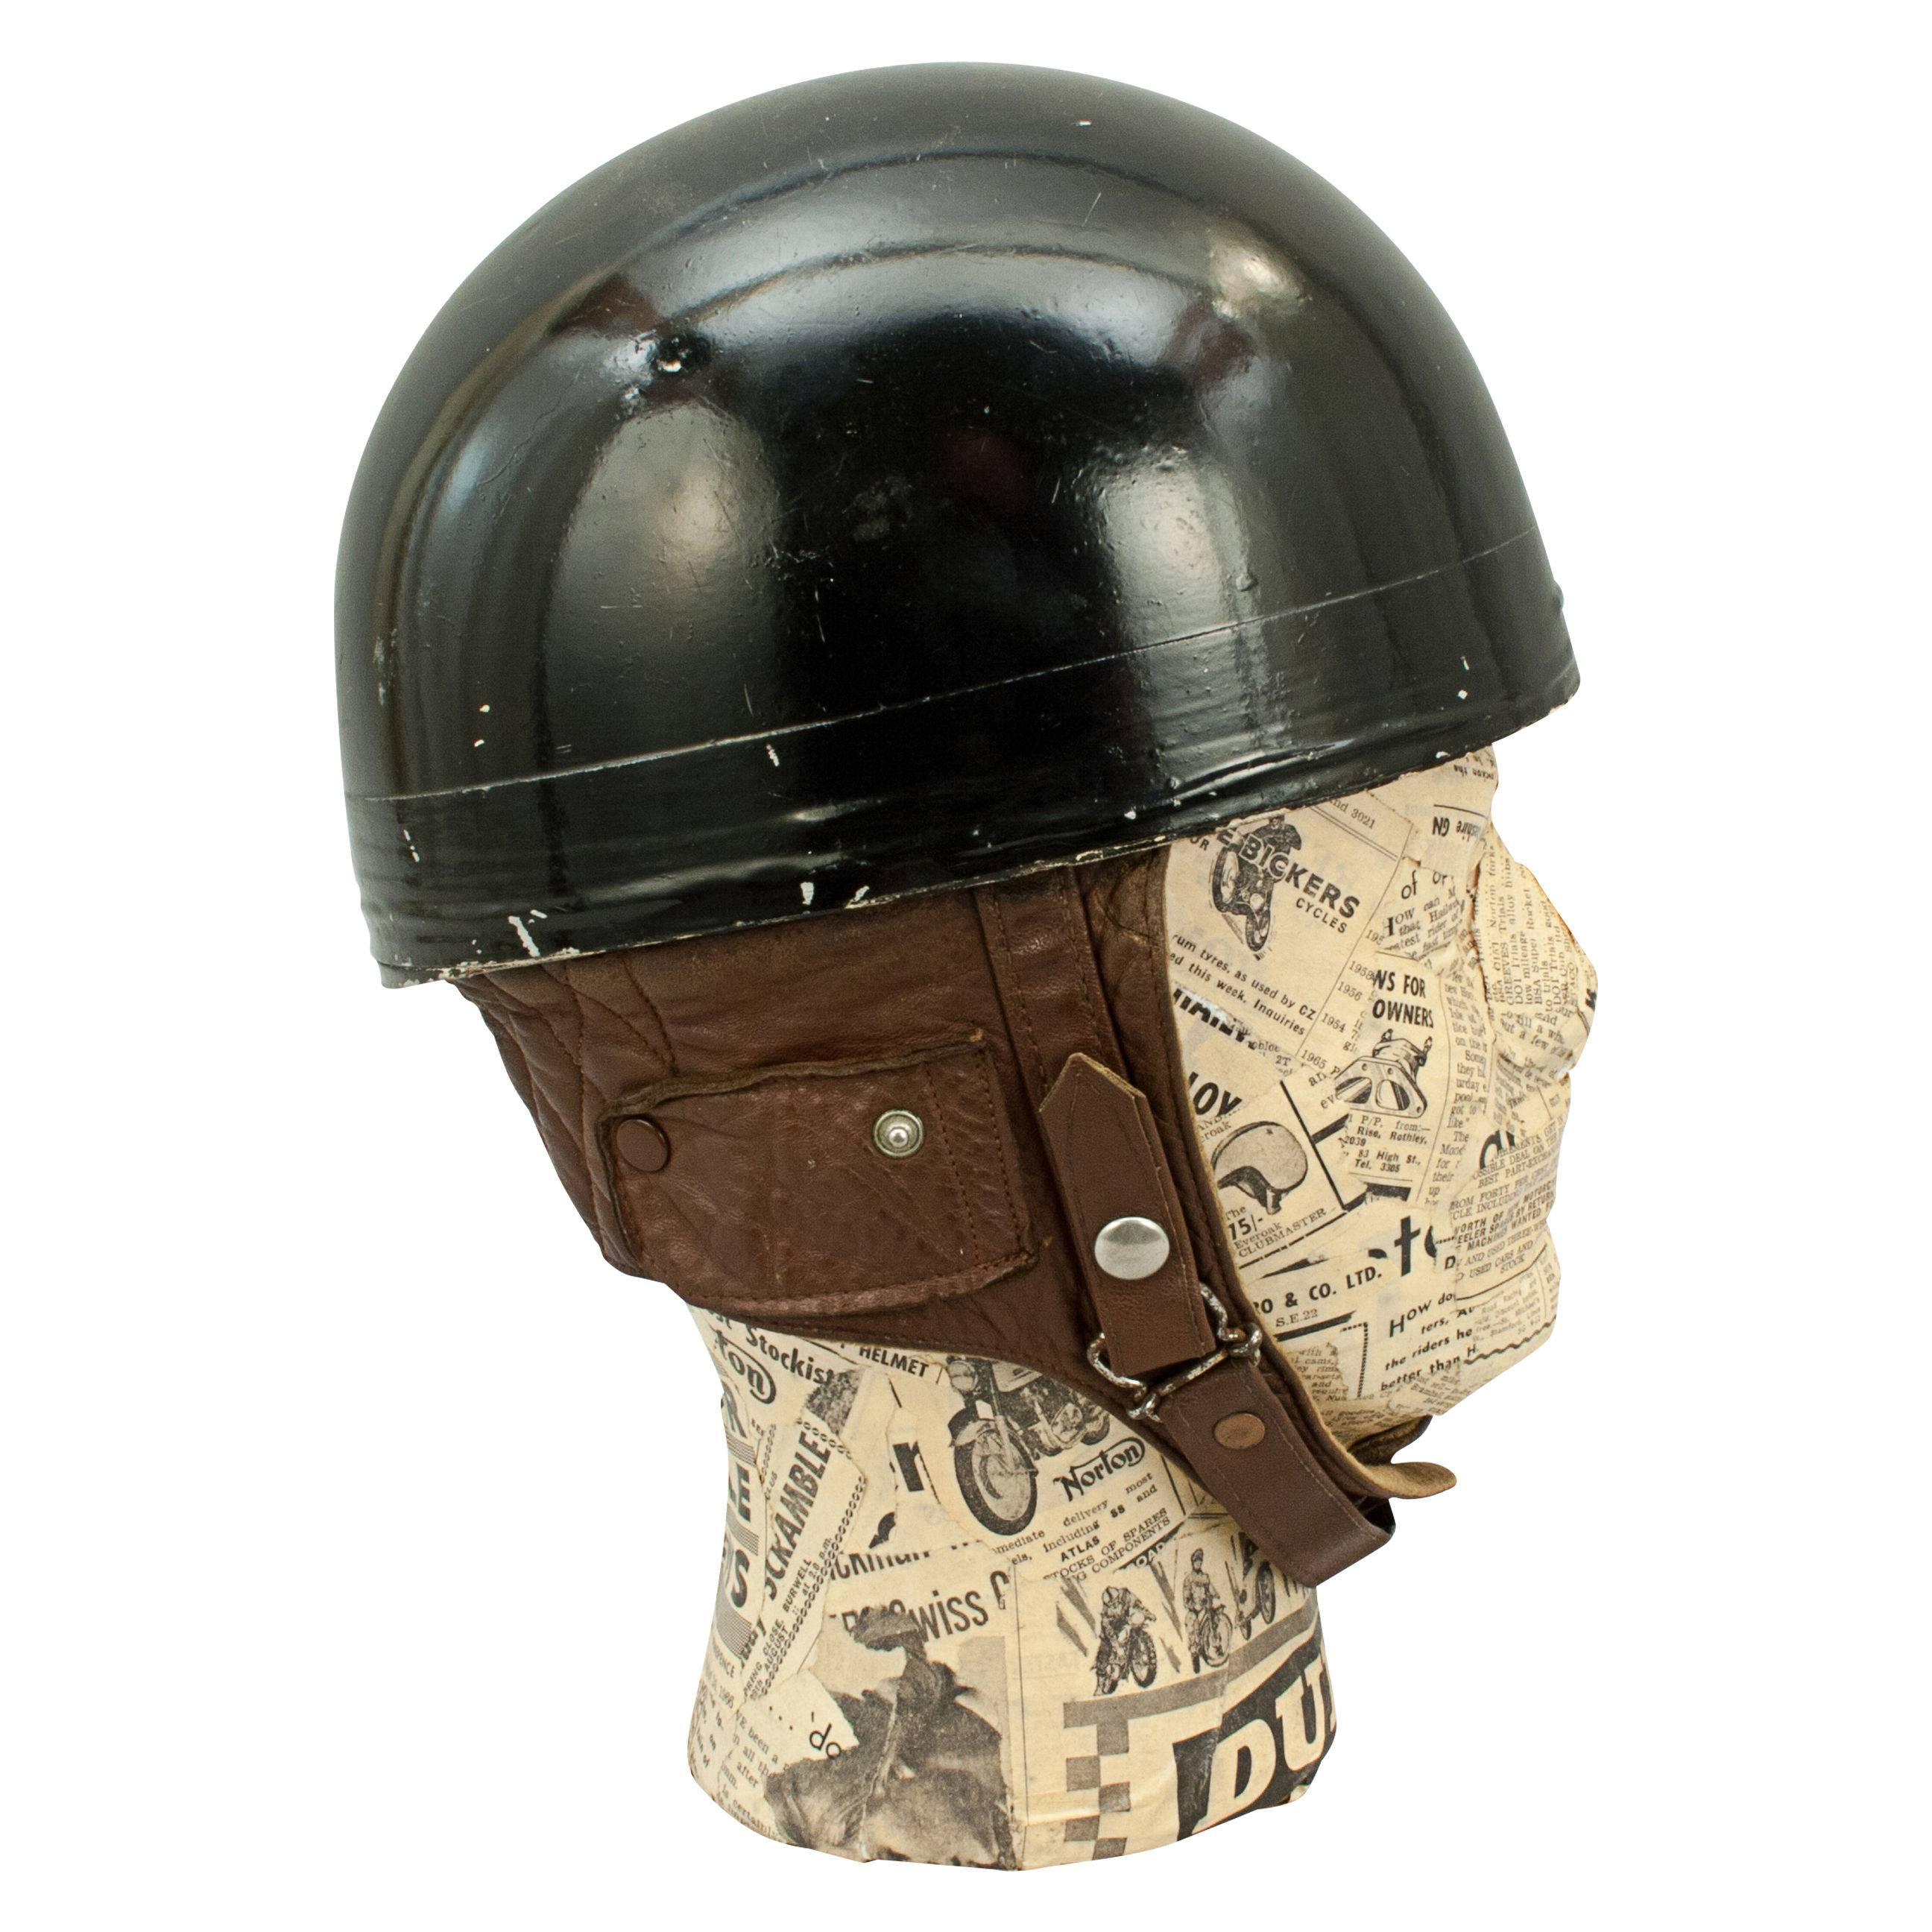 Vintage A.C.U. Motorcycle racing crash helmet, Everoak.
A fine black painted motorcycle, pudding basin shape helmet made in England by Everoak. This helmet has a cork interior, fitted with a leather headband and straps keeping a space between the